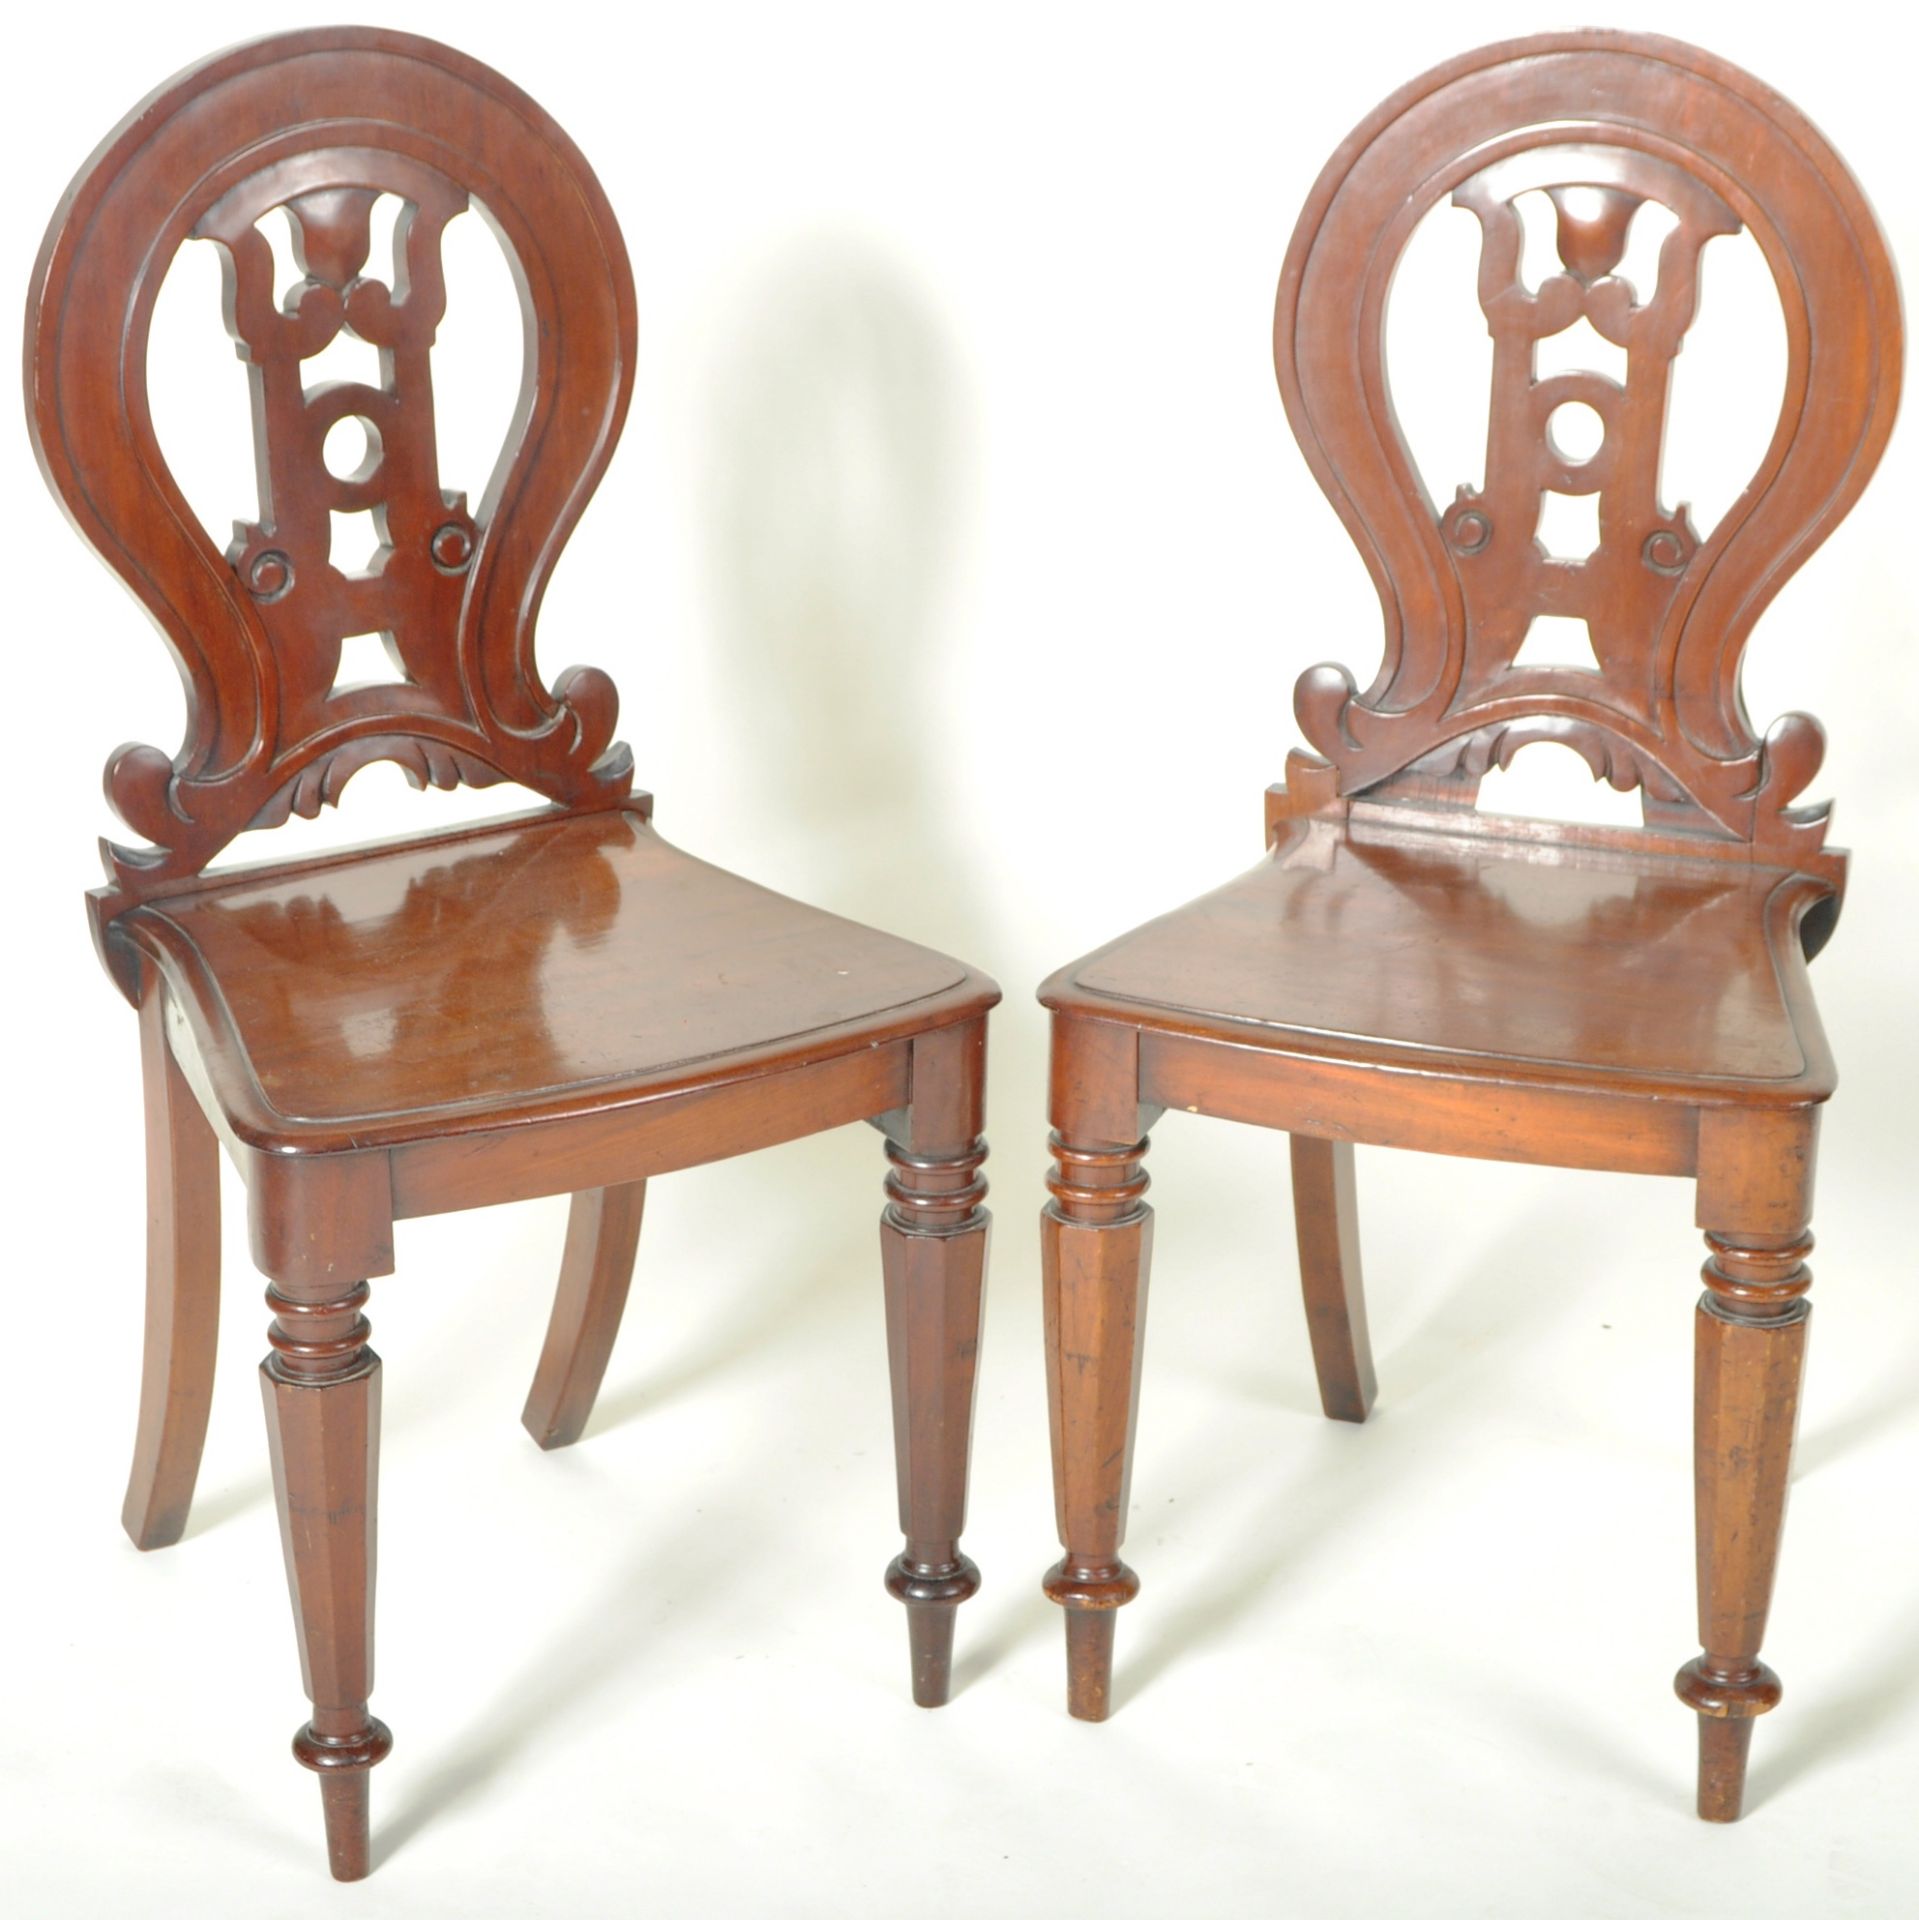 MATCHING PAIR OF VICTORIAN MAHOGANY CARVED HALL CHAIRS - Image 2 of 9